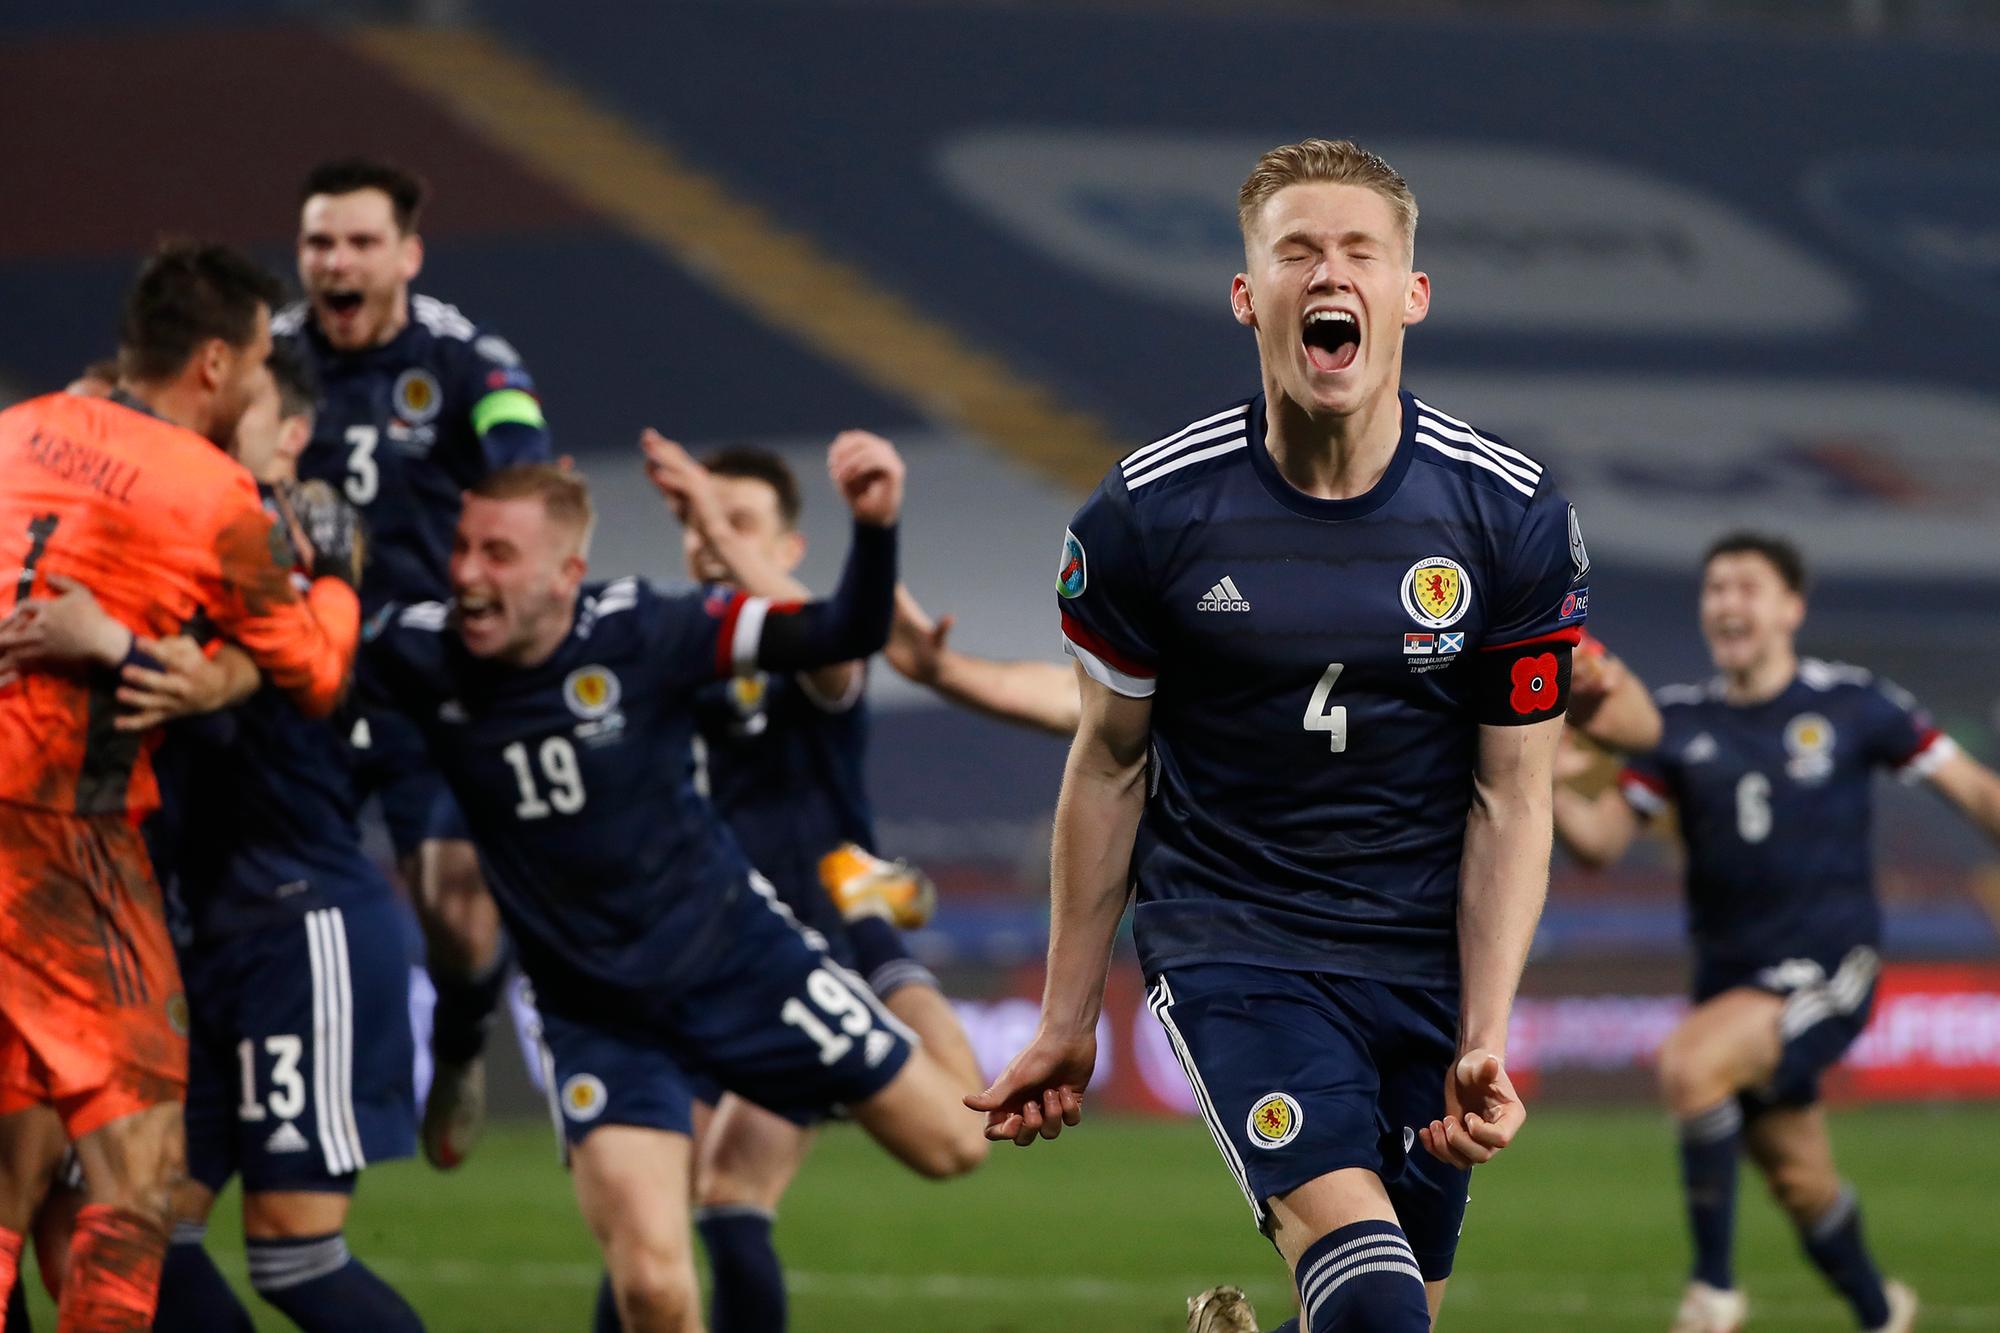 The 11 sub-plots in greatest Scotland football tale in years | The Scotsman